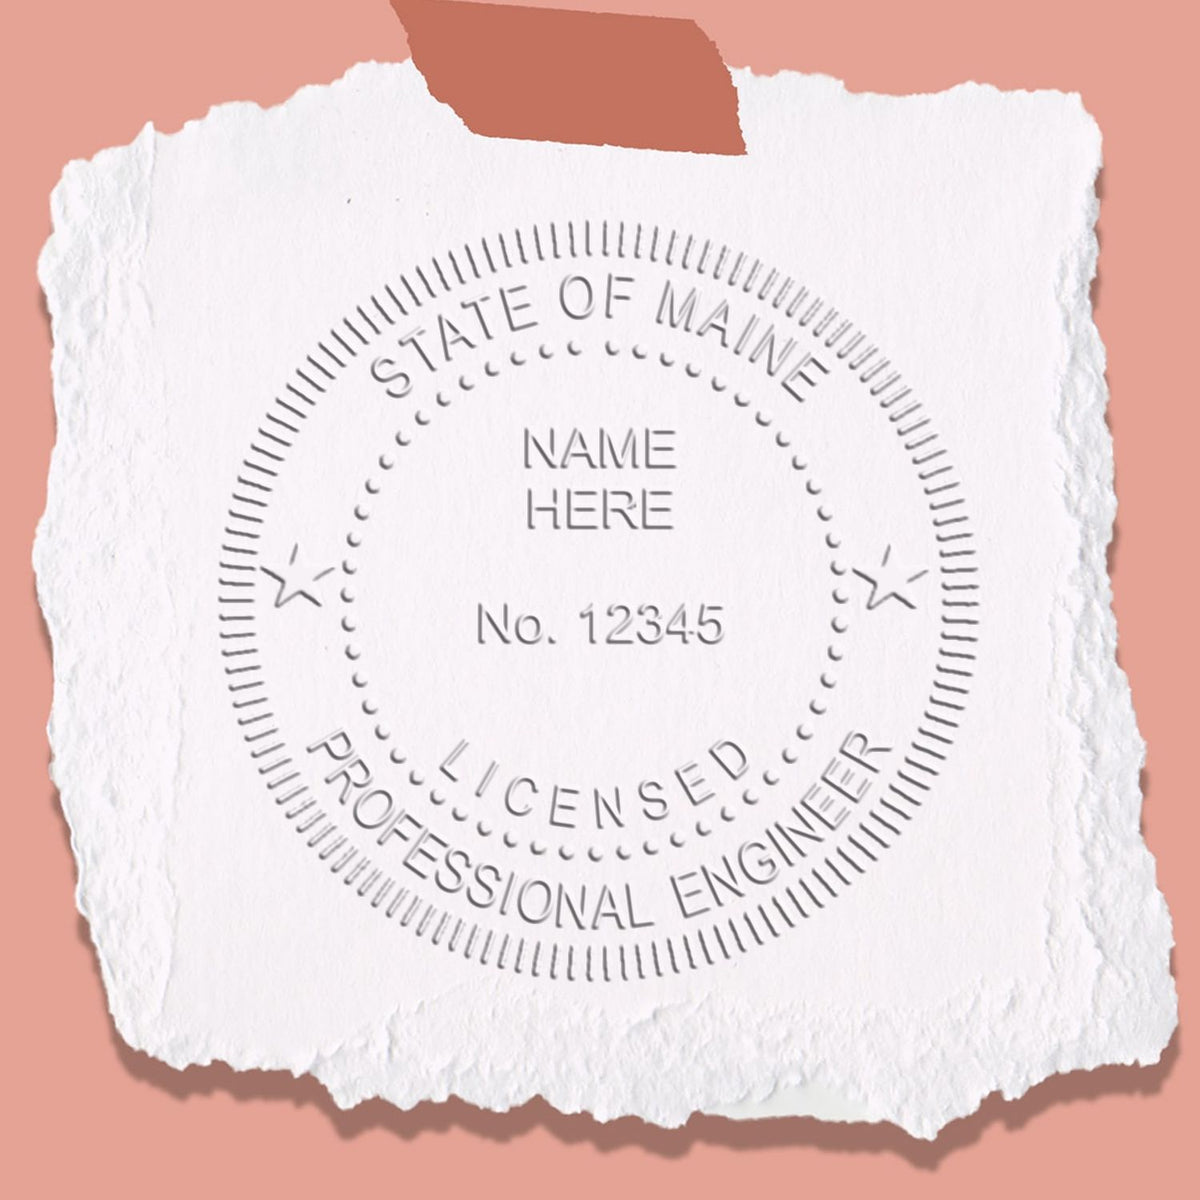 An alternative view of the State of Maine Extended Long Reach Engineer Seal stamped on a sheet of paper showing the image in use